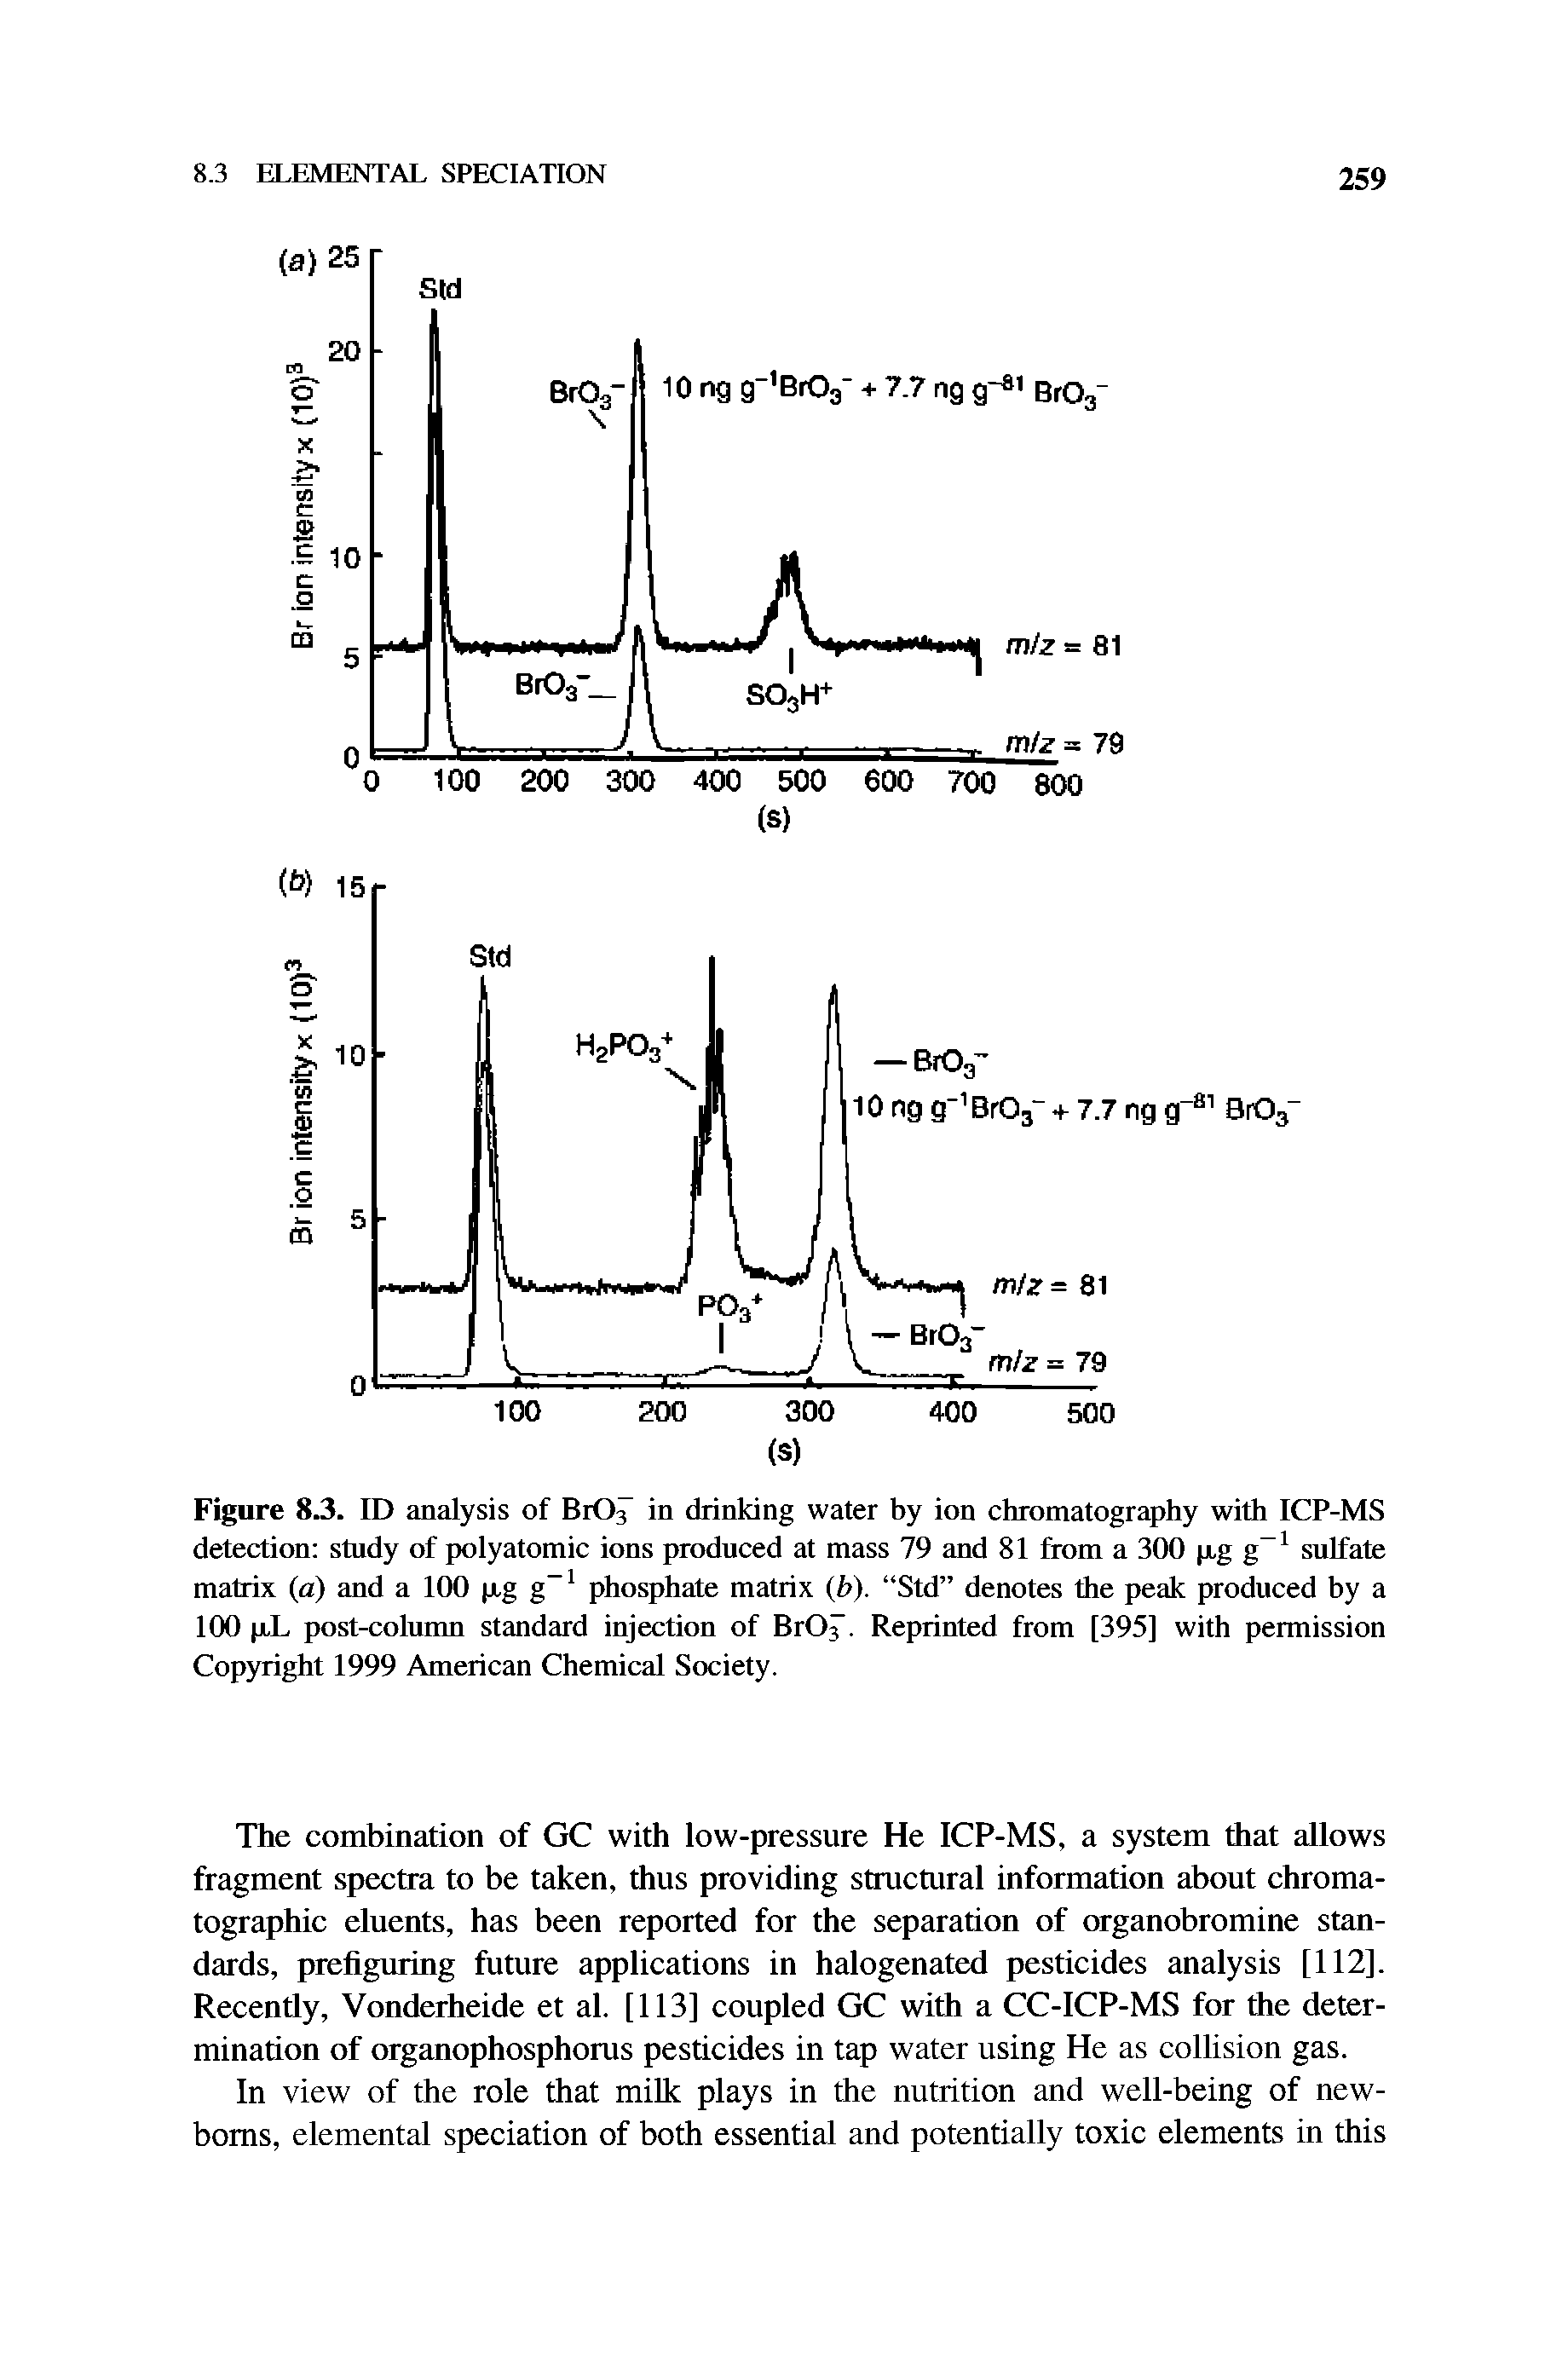 Figure 8.3. ID analysis of B1O3" in drinking water by ion chromatography with ICP-MS detection study of polyatomic ions produced at mass 79 and 81 from a 300 p,g g-1 sulfate matrix a) and a 100 p,g g-1 phosphate matrix (b). Std denotes the peak produced by a 100 p.L post-column standard injection of BrOj". Reprinted from [395] with permission Copyright 1999 American Chemical Society.